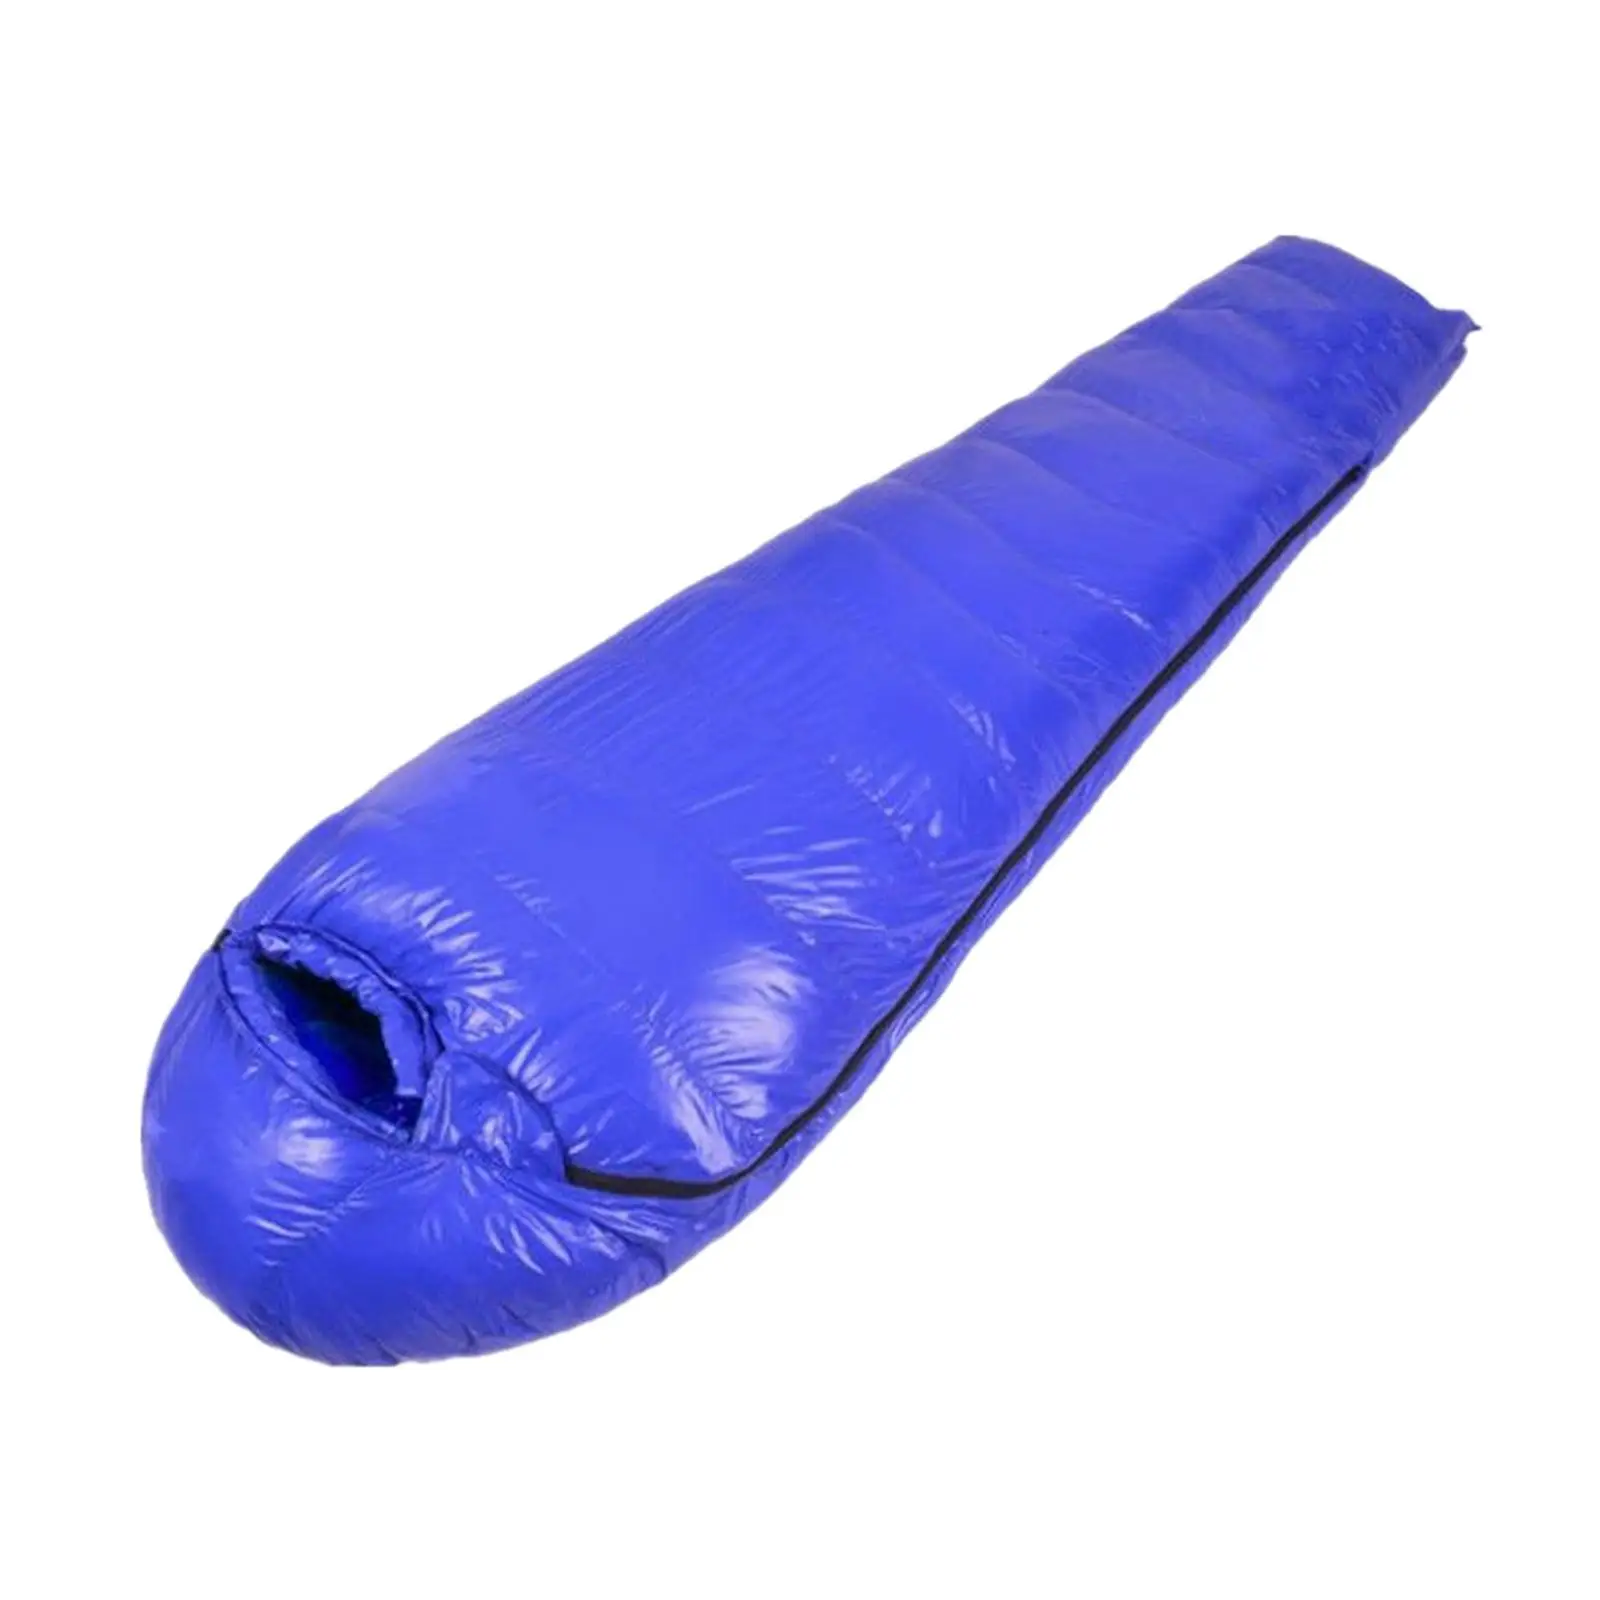 Portable Sleeping Bag Waterproof Mummy Style Warm Thermal Lightweight for Travel Winter Outdoor Tent Camping